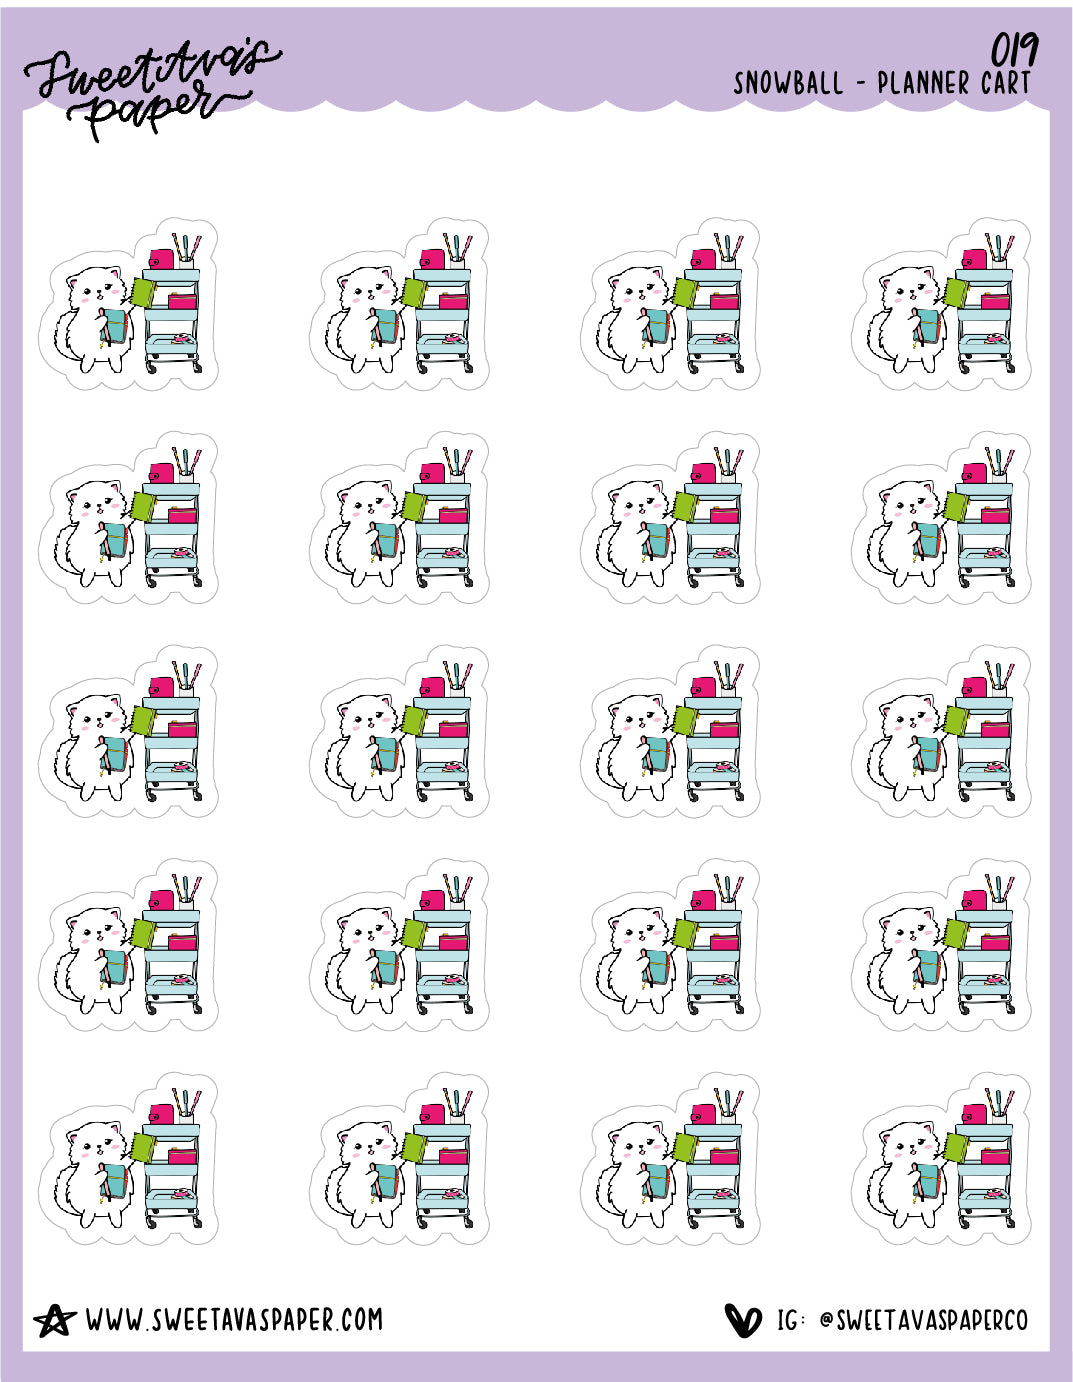 Planner Cart Stickers - Snowball The Cat - [019]